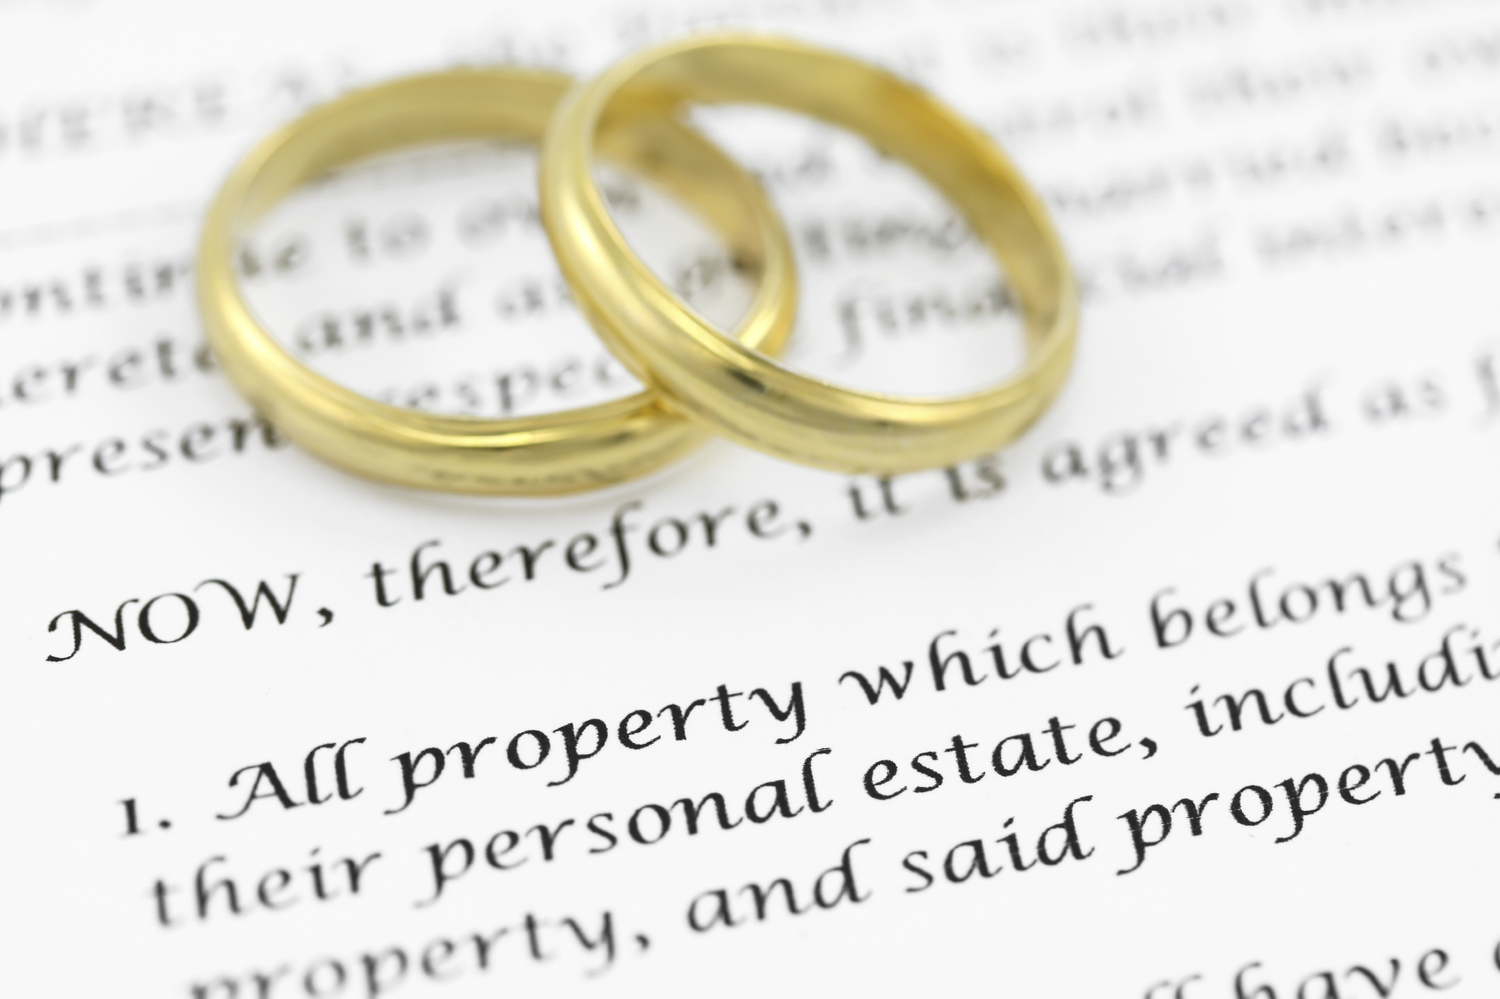 Pre-nuptial agreements, necessary? – my weekly perspective